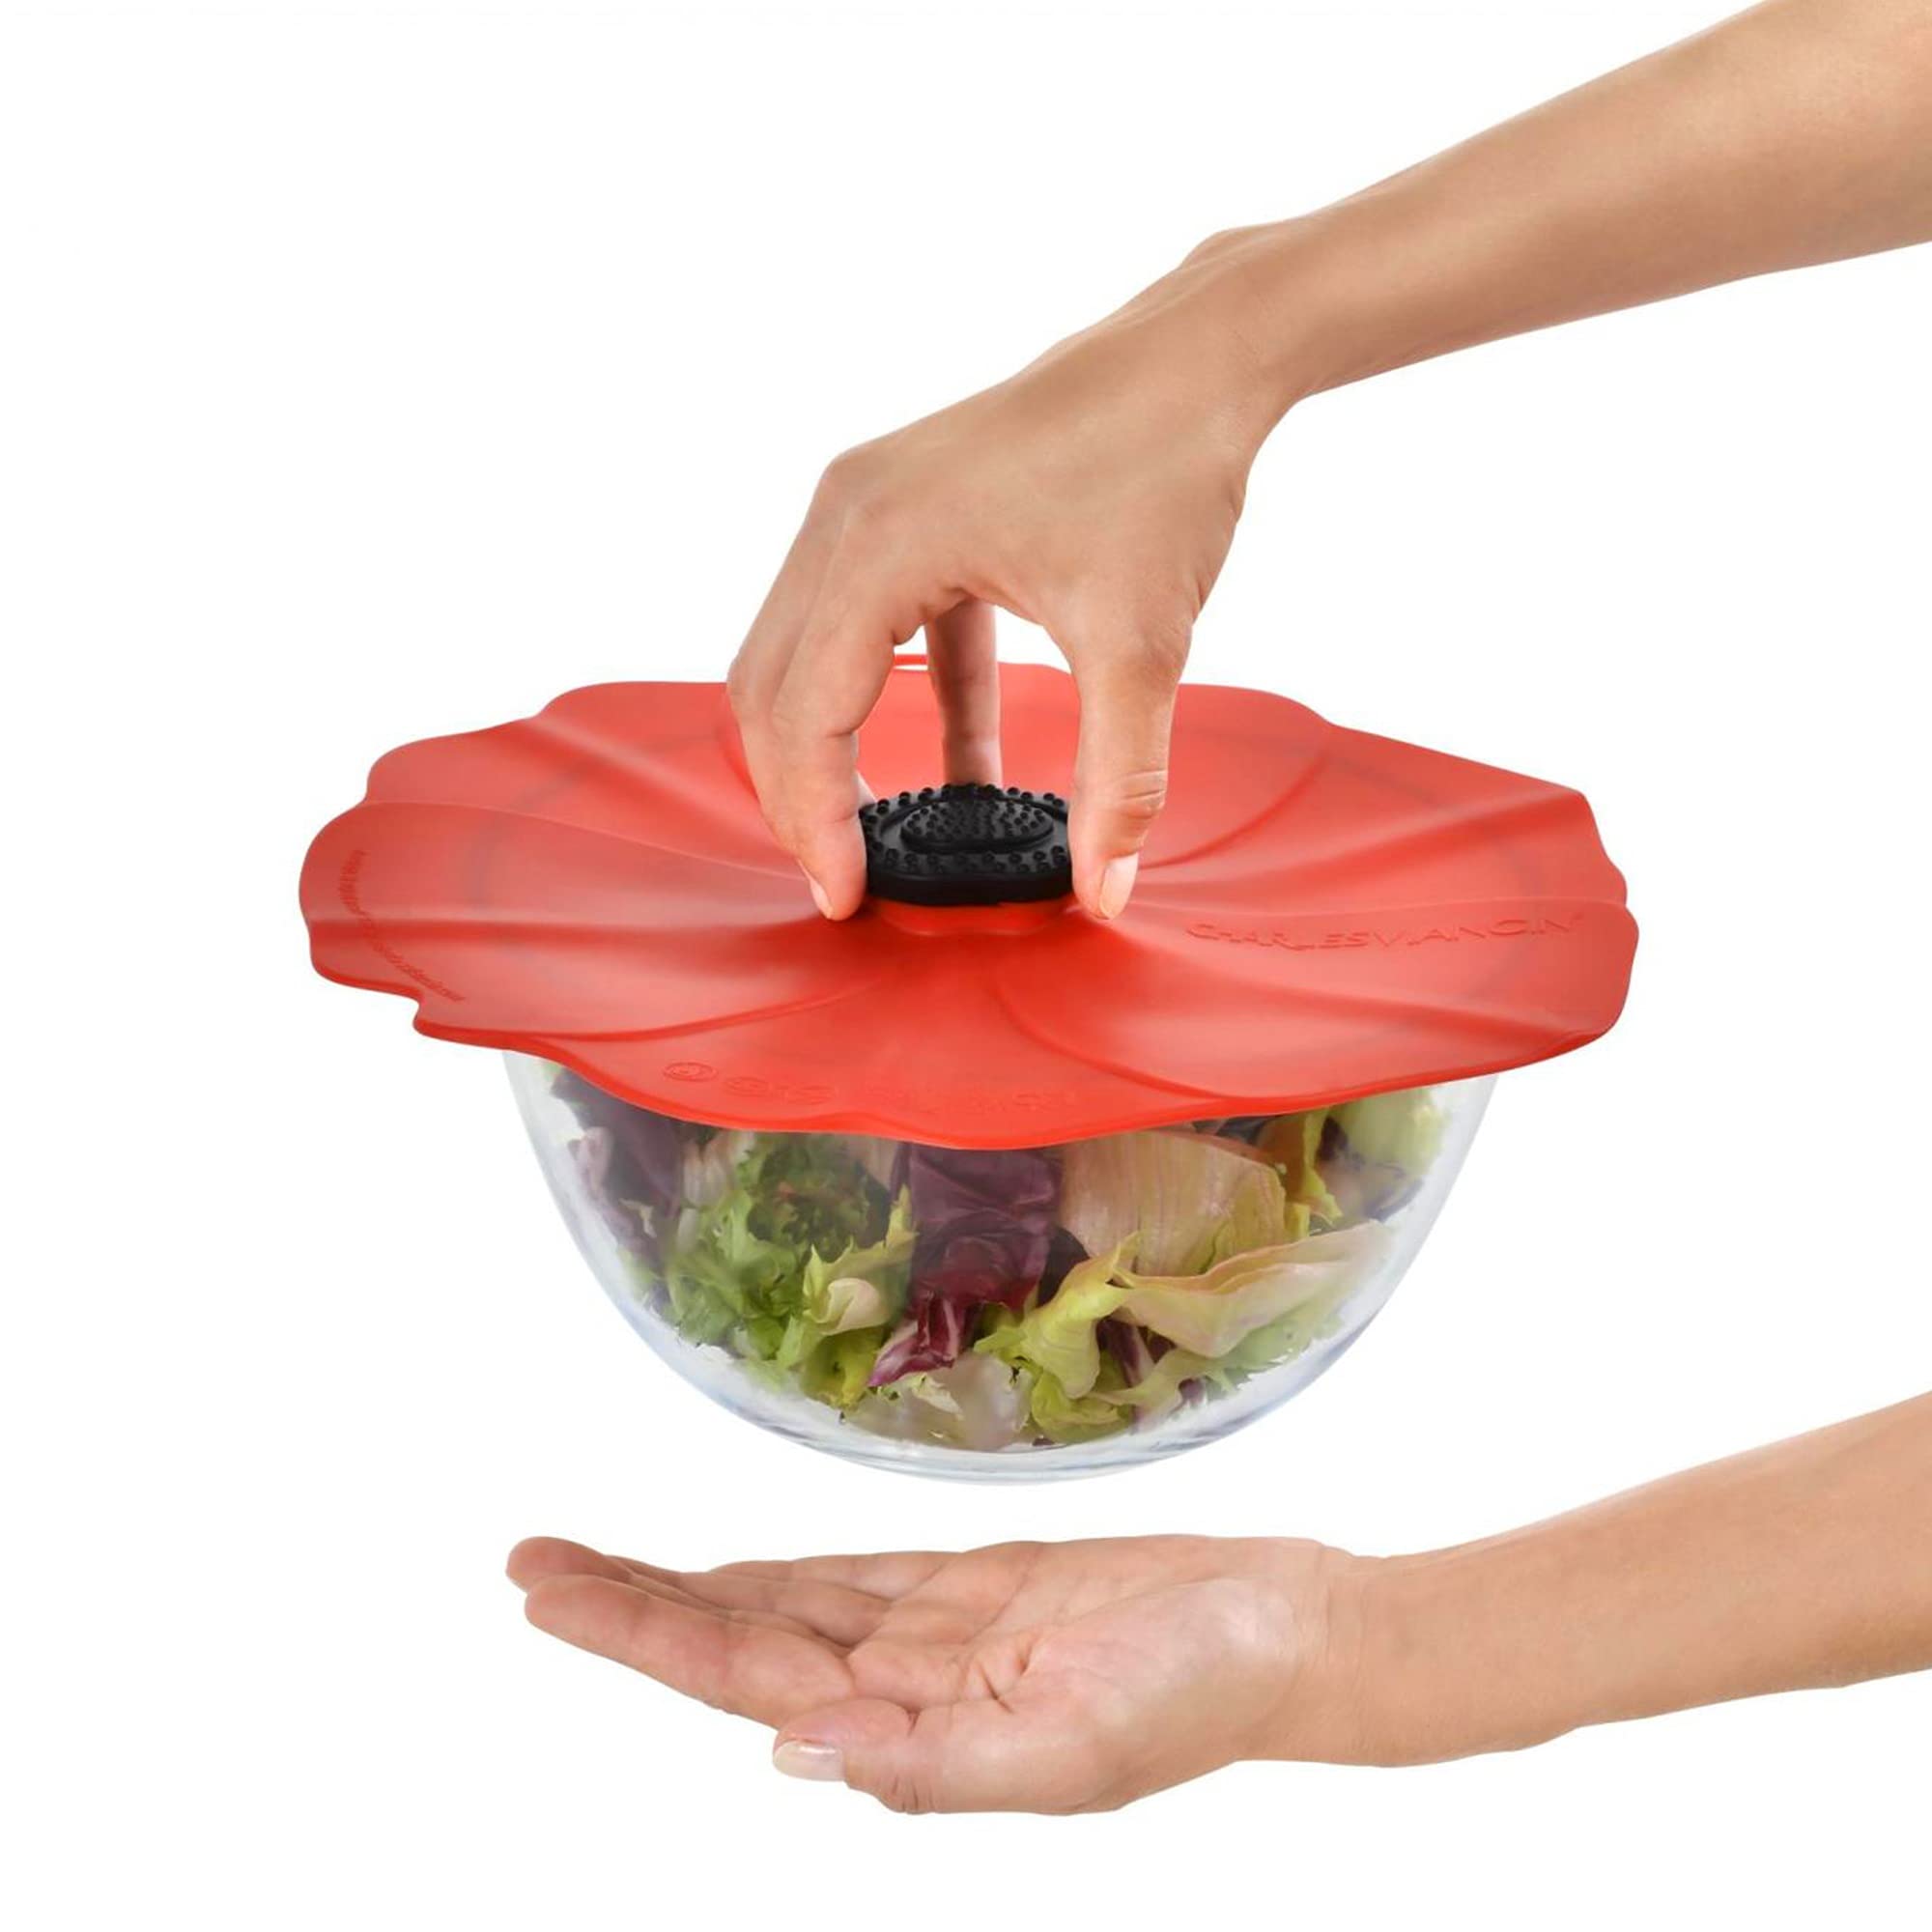 Charles Viancin - Poppy Lid Red Gift-Box - Set of 4 Silicone Lids for Food Storage and Cooking - 11''/28cm + 9''/23cm + 6''/15cm + 4''/10cm - Airtight Seal on Any Smooth Rim Surface